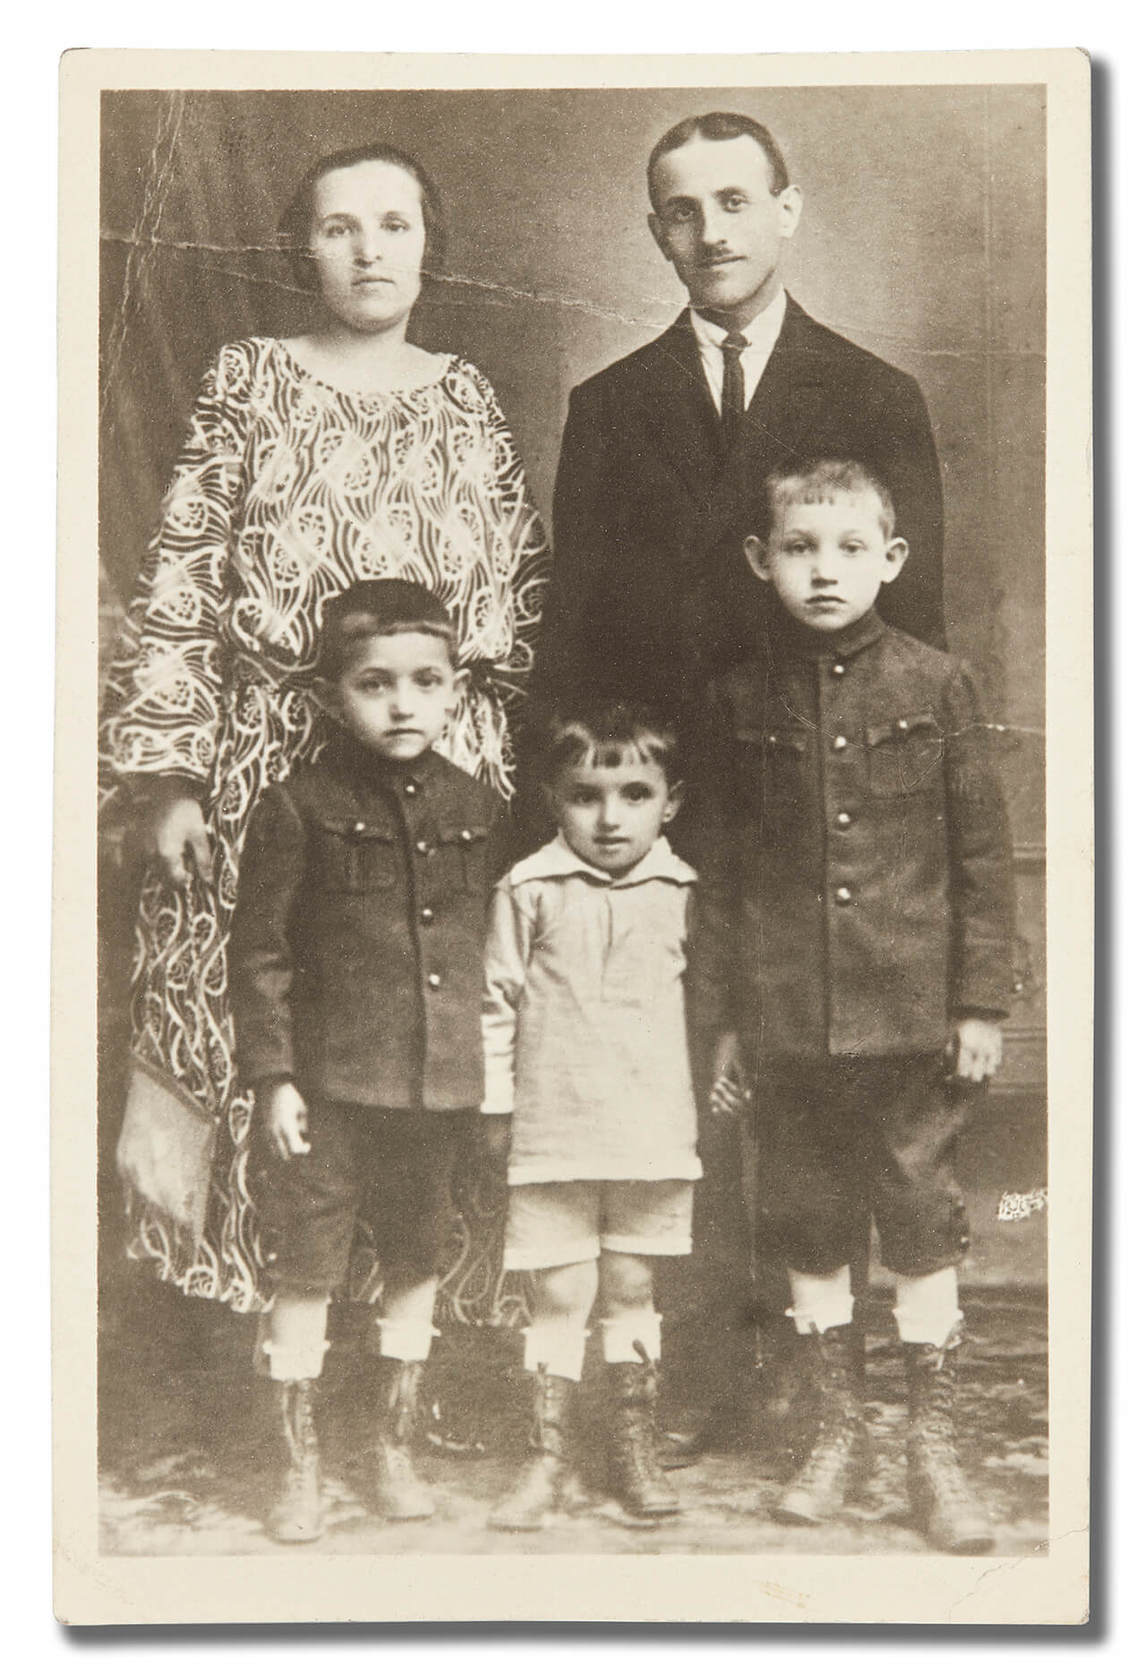 Art Canada Institute, Photograph, Left to right: (back row) parents Zisla Lewis and Jankel and (front row) children Yosl, Gershon, and Itchen, date unknown (c.1924)